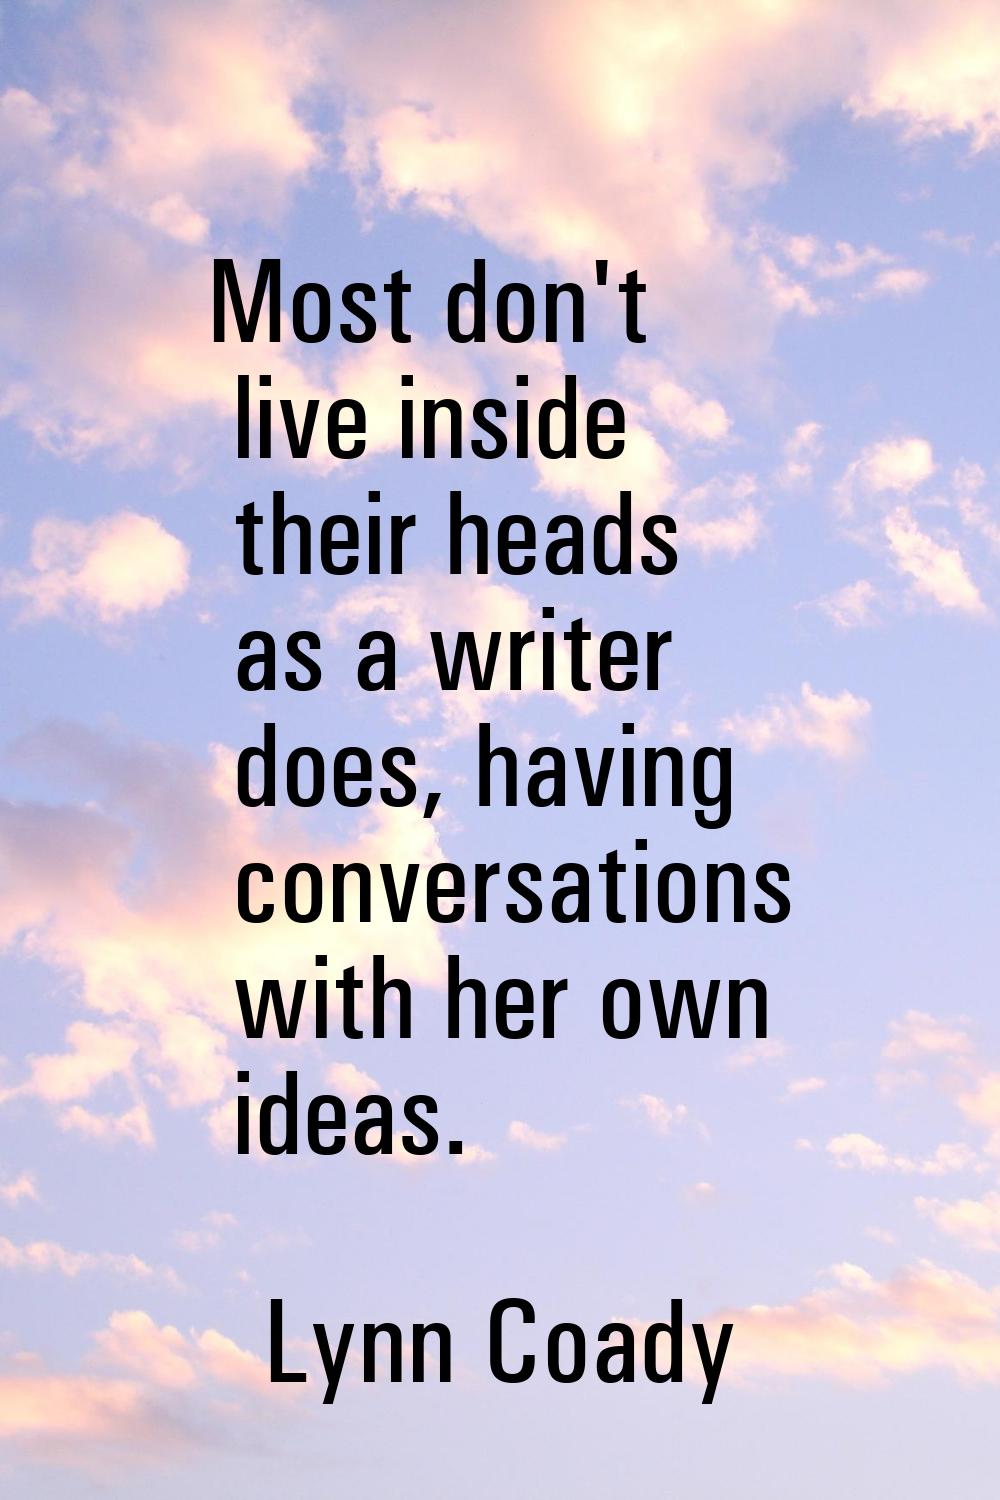 Most don't live inside their heads as a writer does, having conversations with her own ideas.